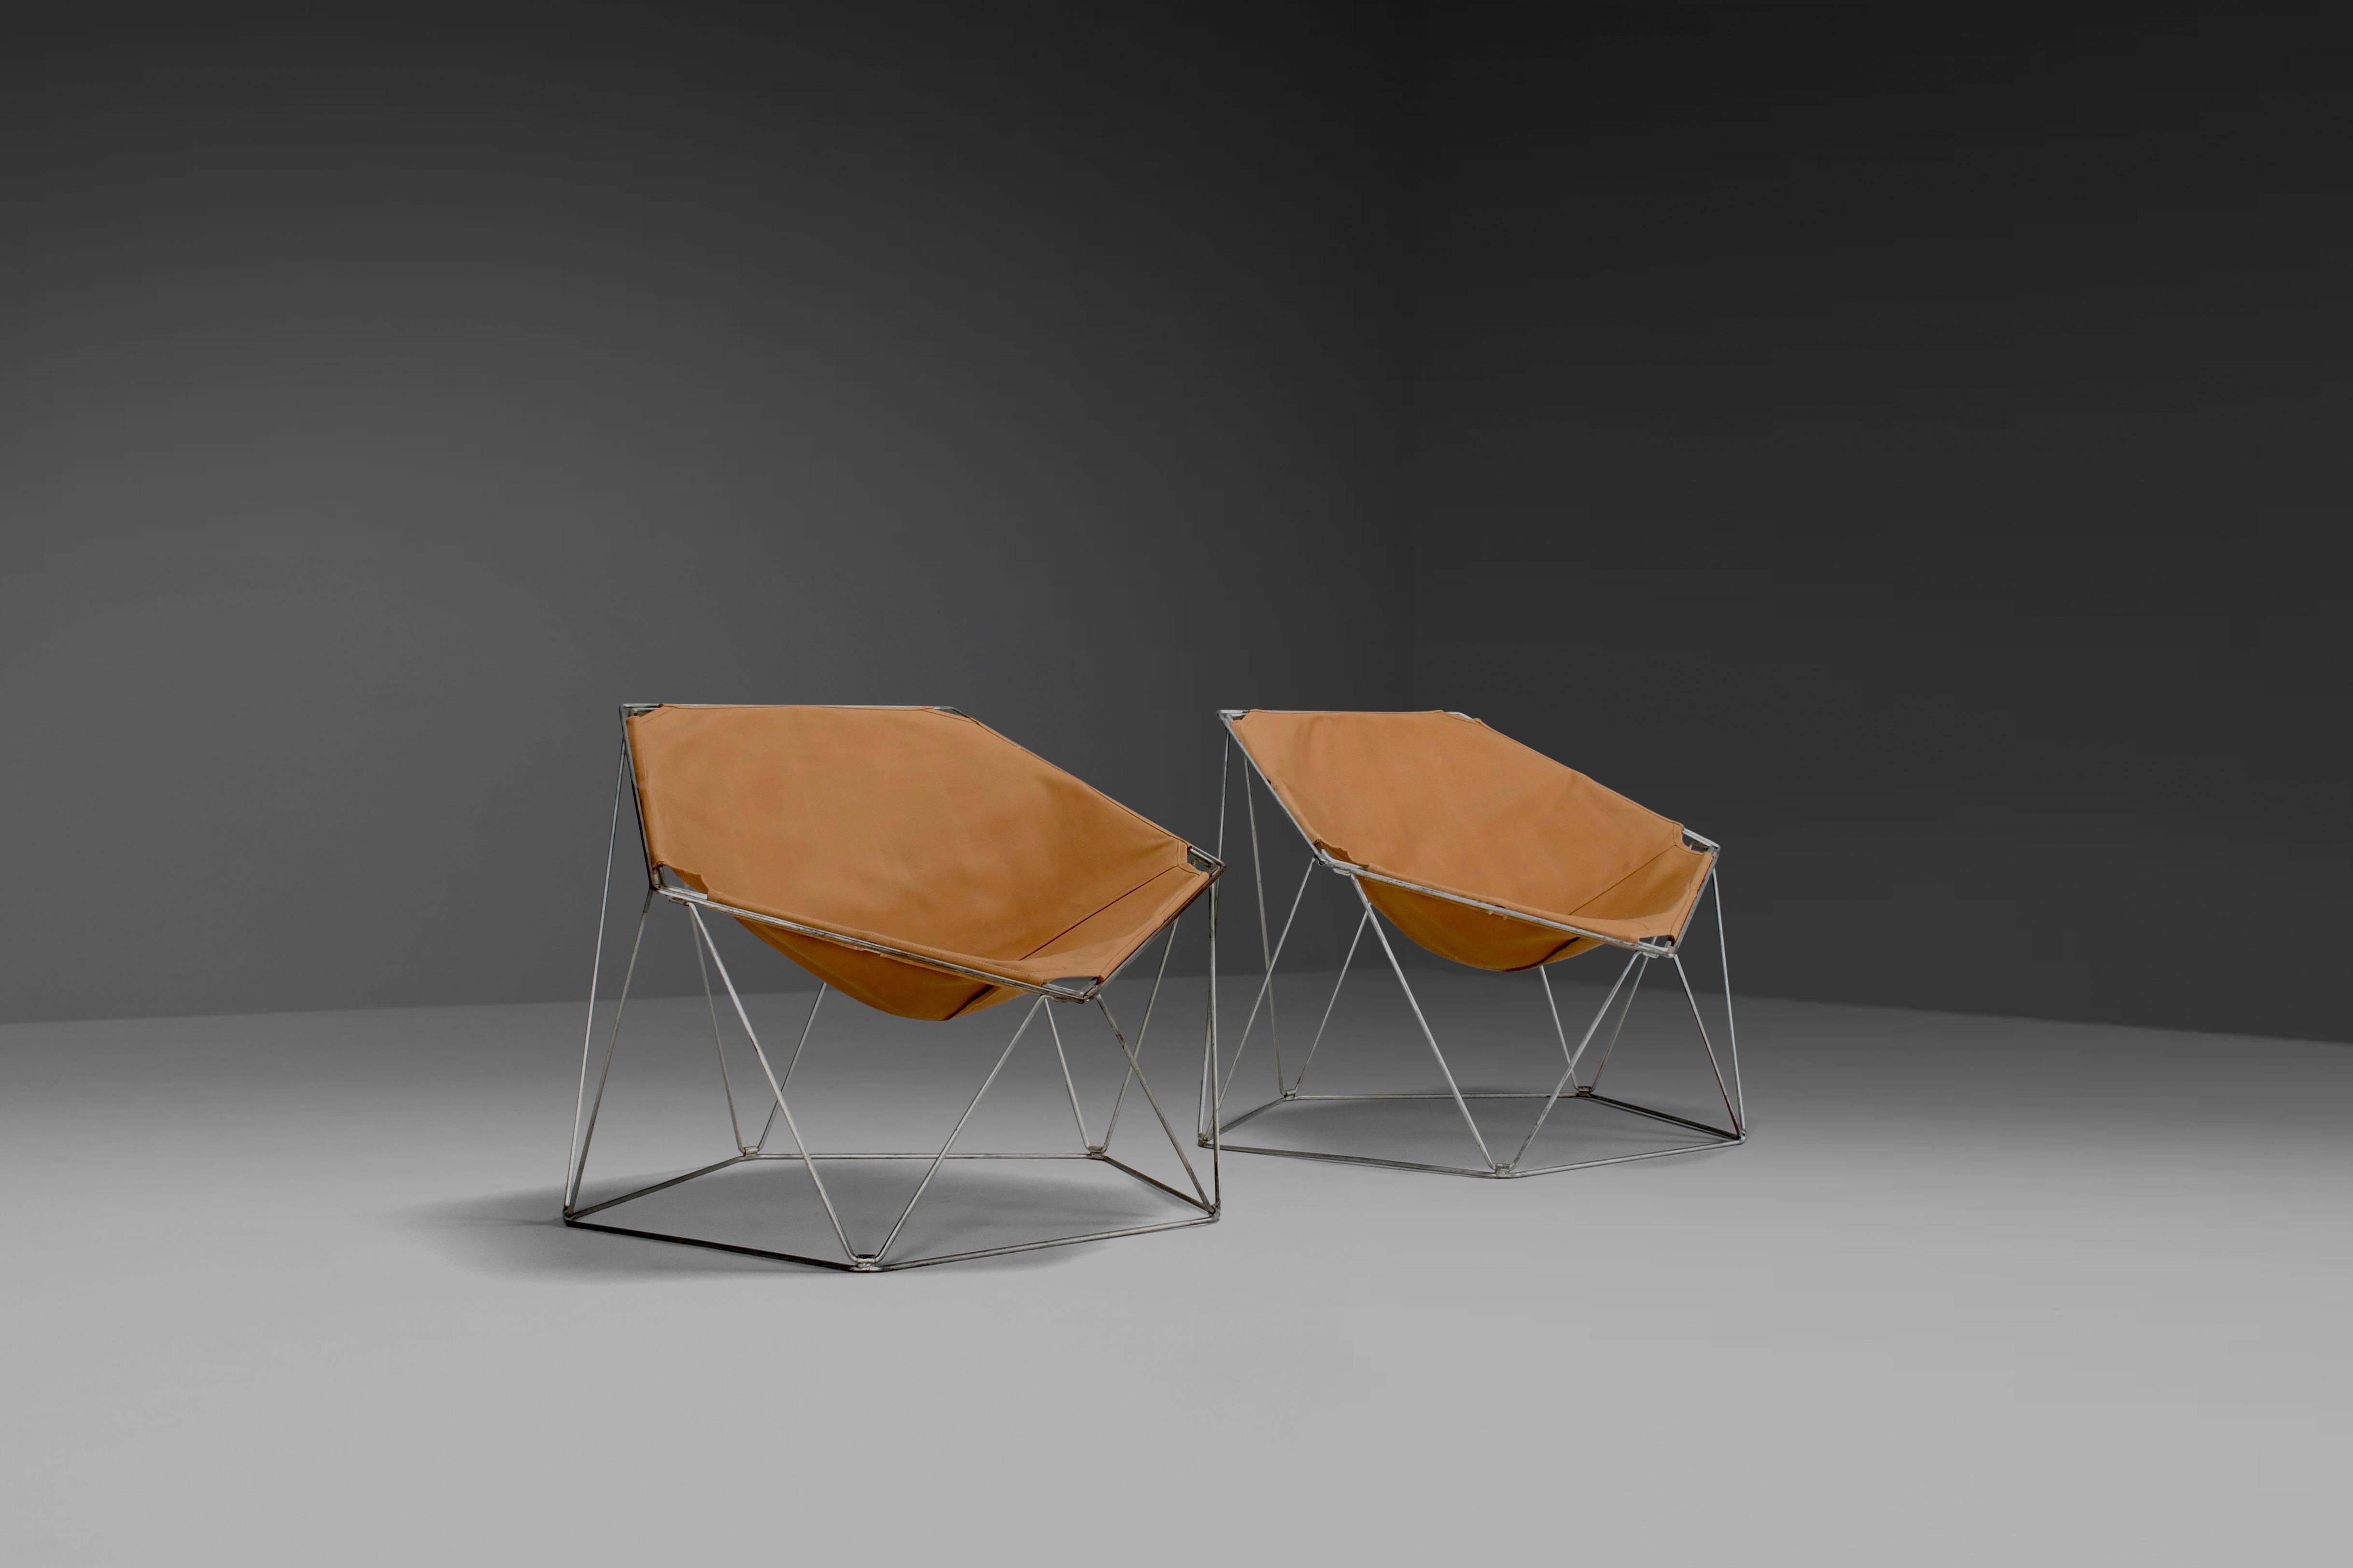 Set of early Penta chairs in very good condition.

Designed by Jean-Paul Barray & Kim Moltzer. 

Manufactured by Bofinger in the 1960s.

The chairs have a five-corner shaped zinc colored metal wire frame which can be folded for easy storage or